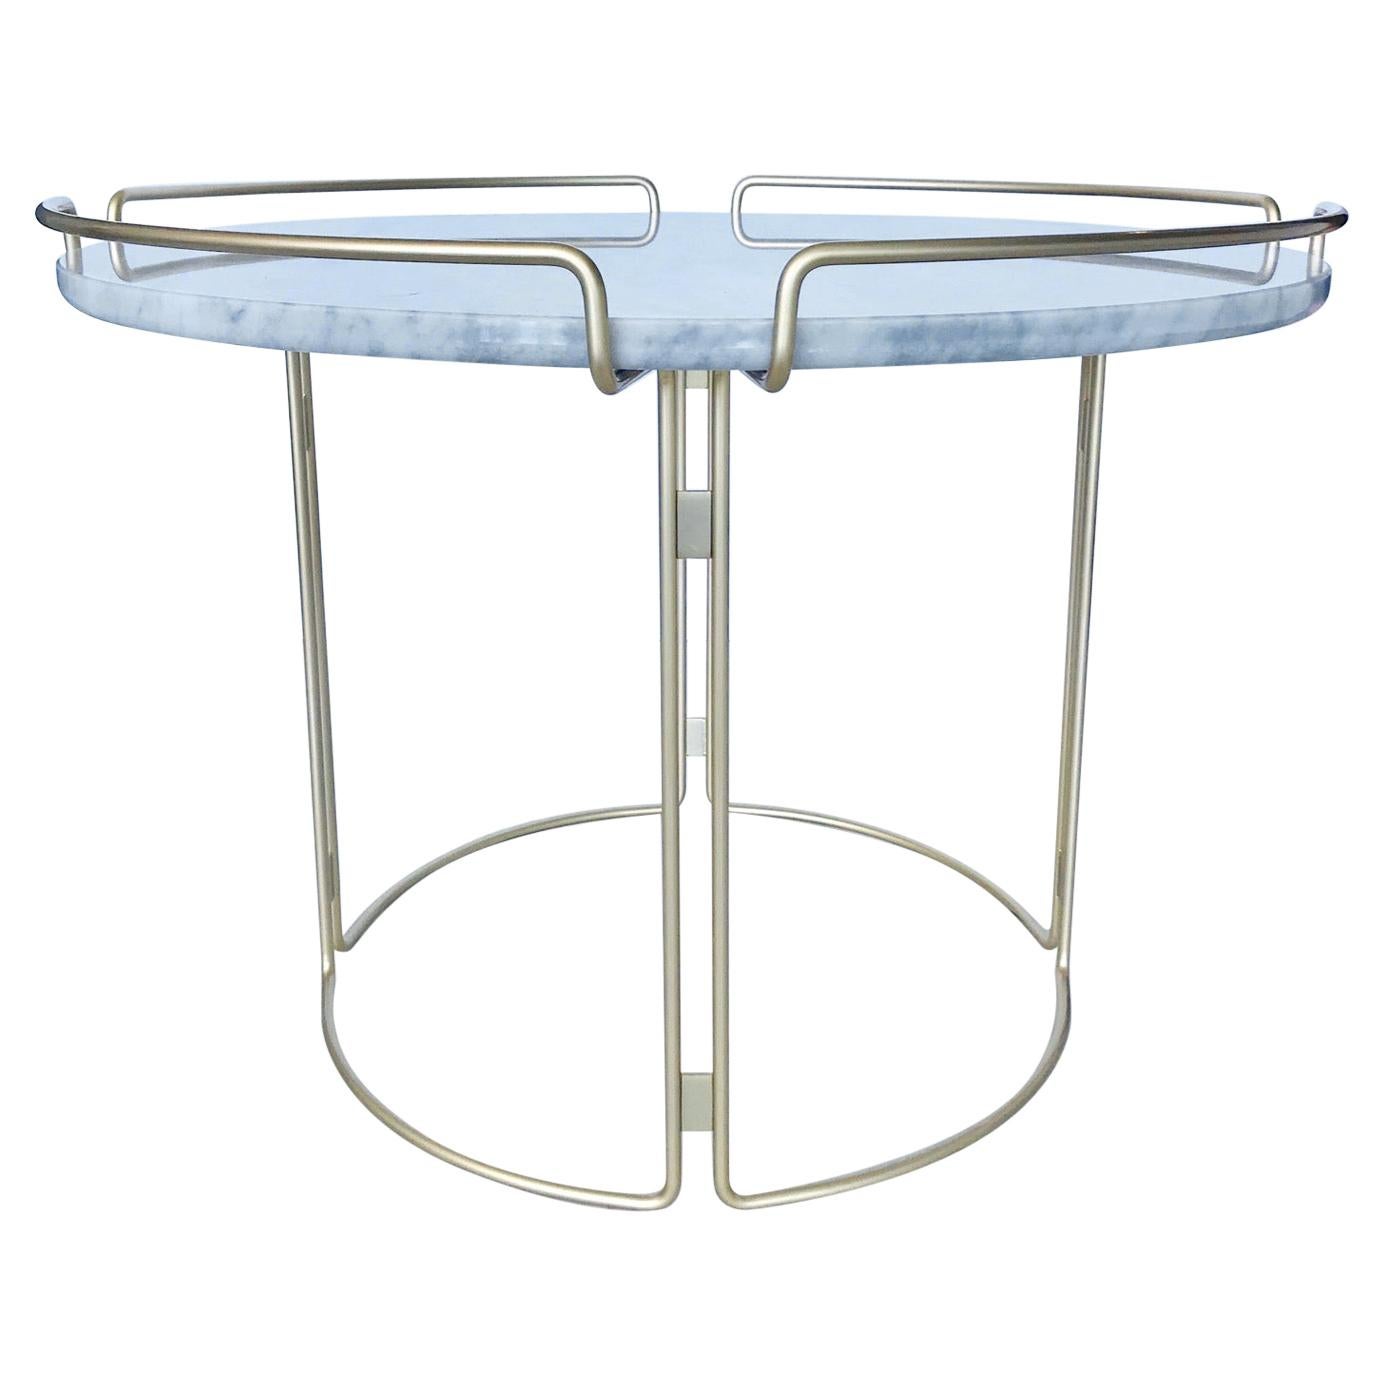 Gorgeous side table designed by Fabrice Berrux for Roche Bobois. Table has a Mid-Century Modern inspired design. Features white Carrara marble top with round three-sided steel wire frame in lacquered matte gold or satin brass finish.